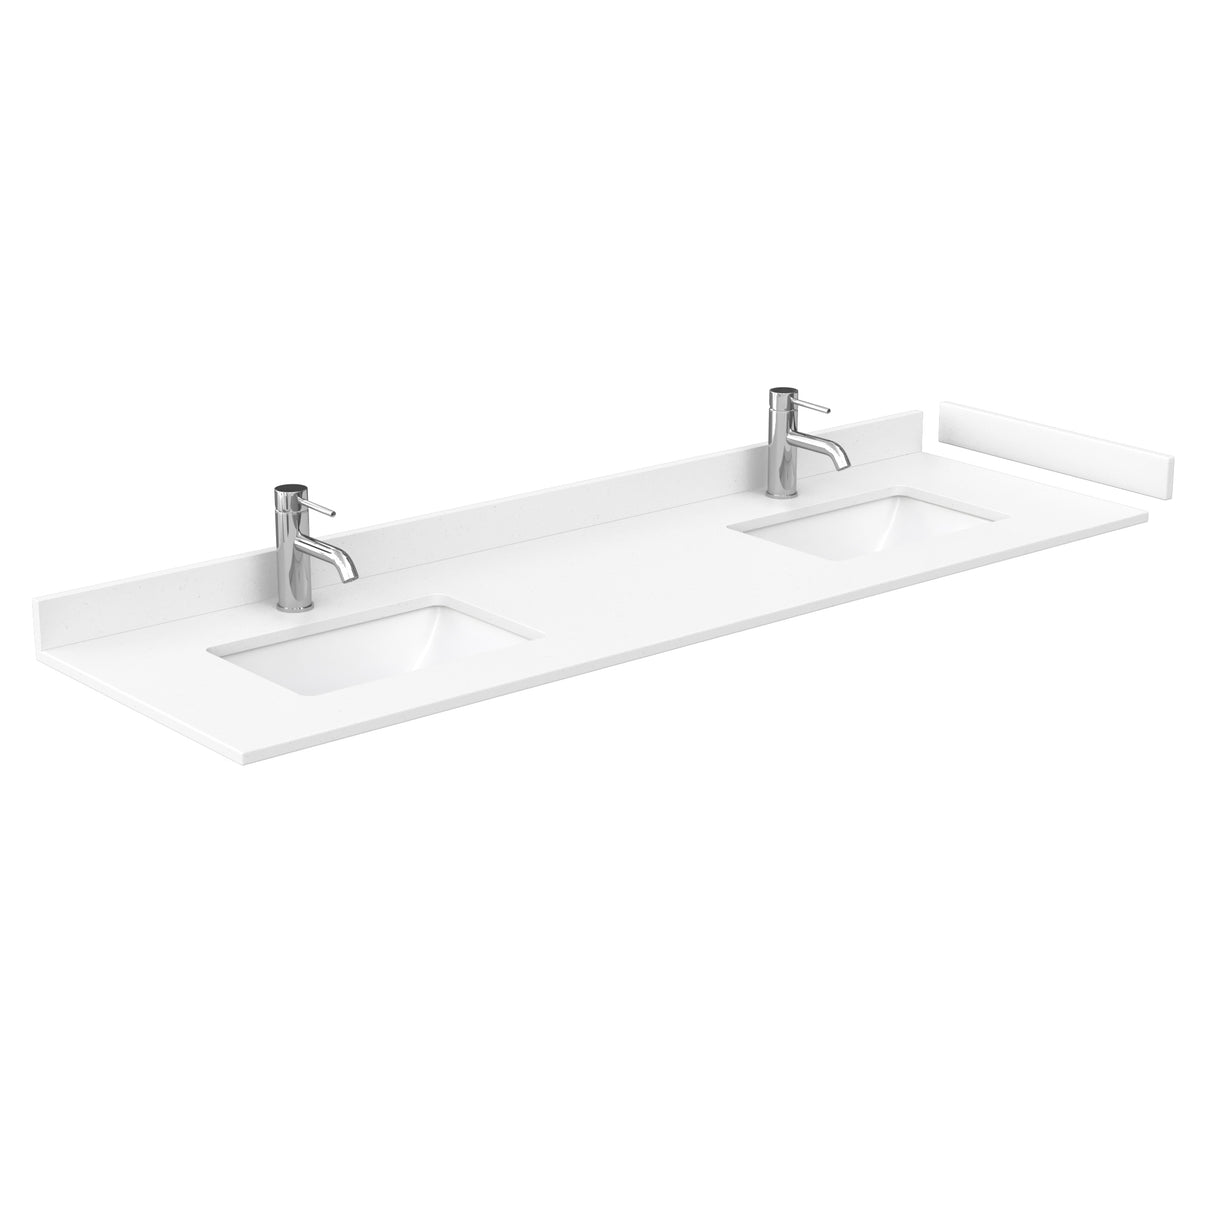 Daria 72 Inch Double Bathroom Vanity in White White Cultured Marble Countertop Undermount Square Sinks No Mirror